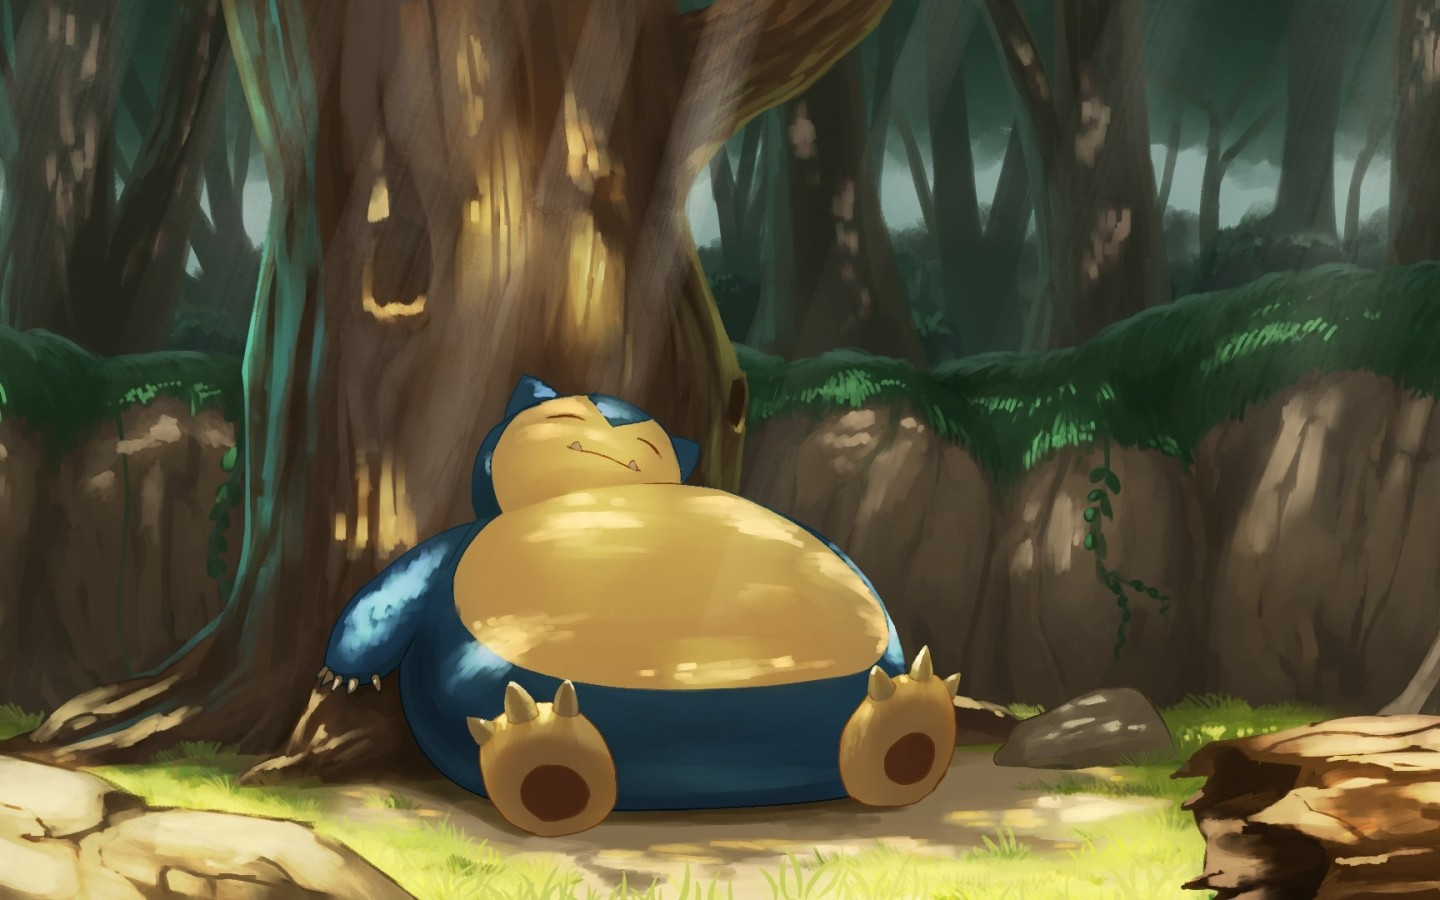 Download 1440x900 Snorlax, Pokemon, Lazy, Sleeping, Forest, Cute Wallpaper for MacBook Pro 15 inch, MacBook Air 13 inch